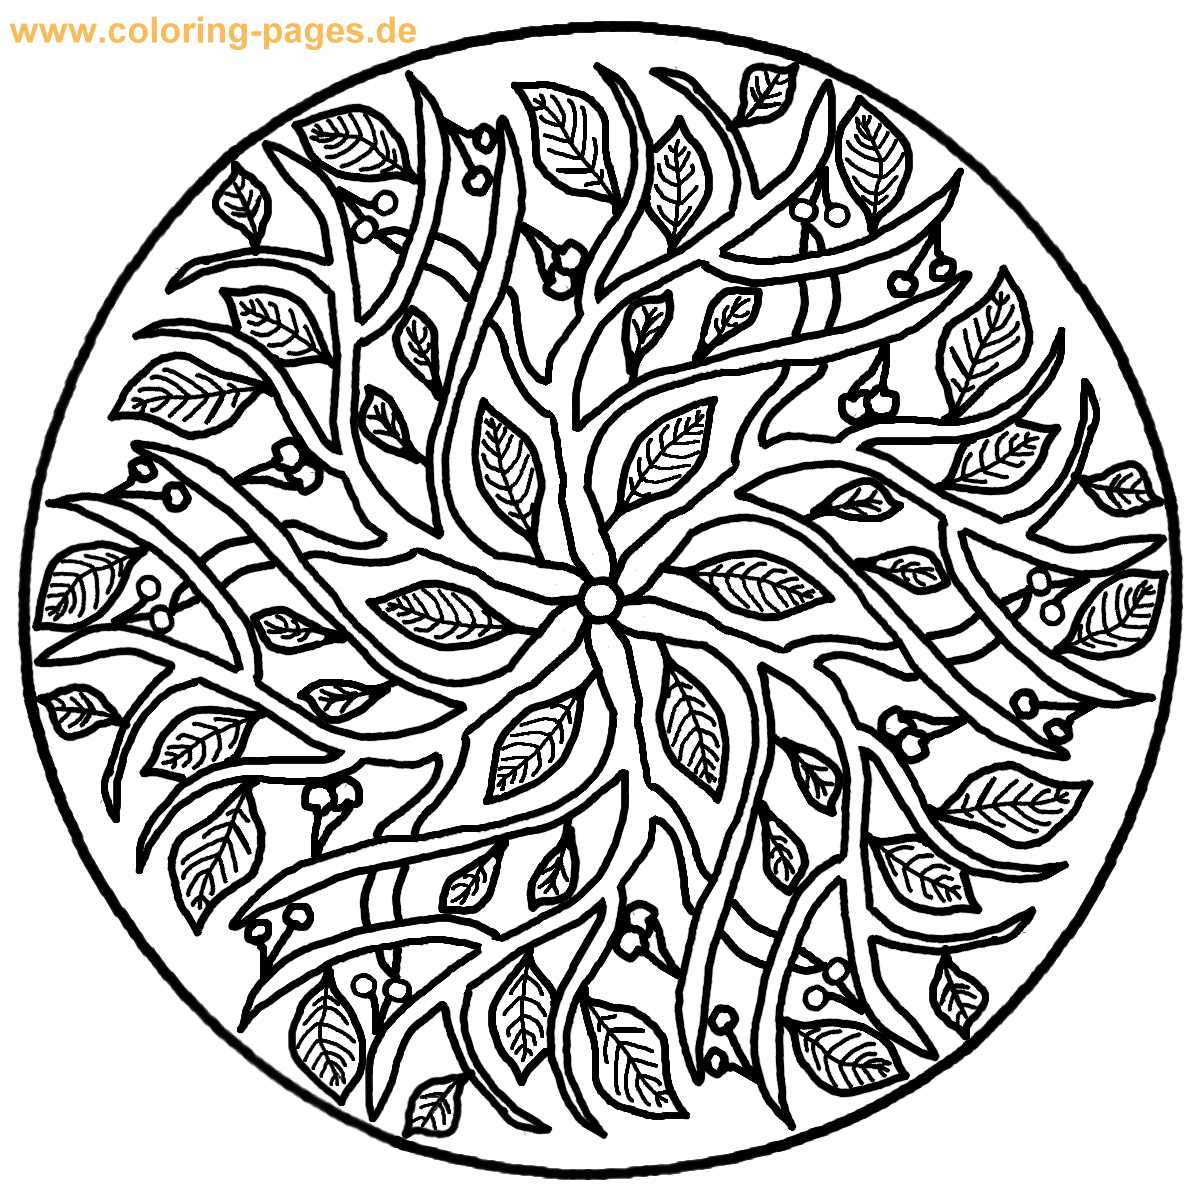  Free Coloring Pages For Adults – letscoloringpages.com – Star tree